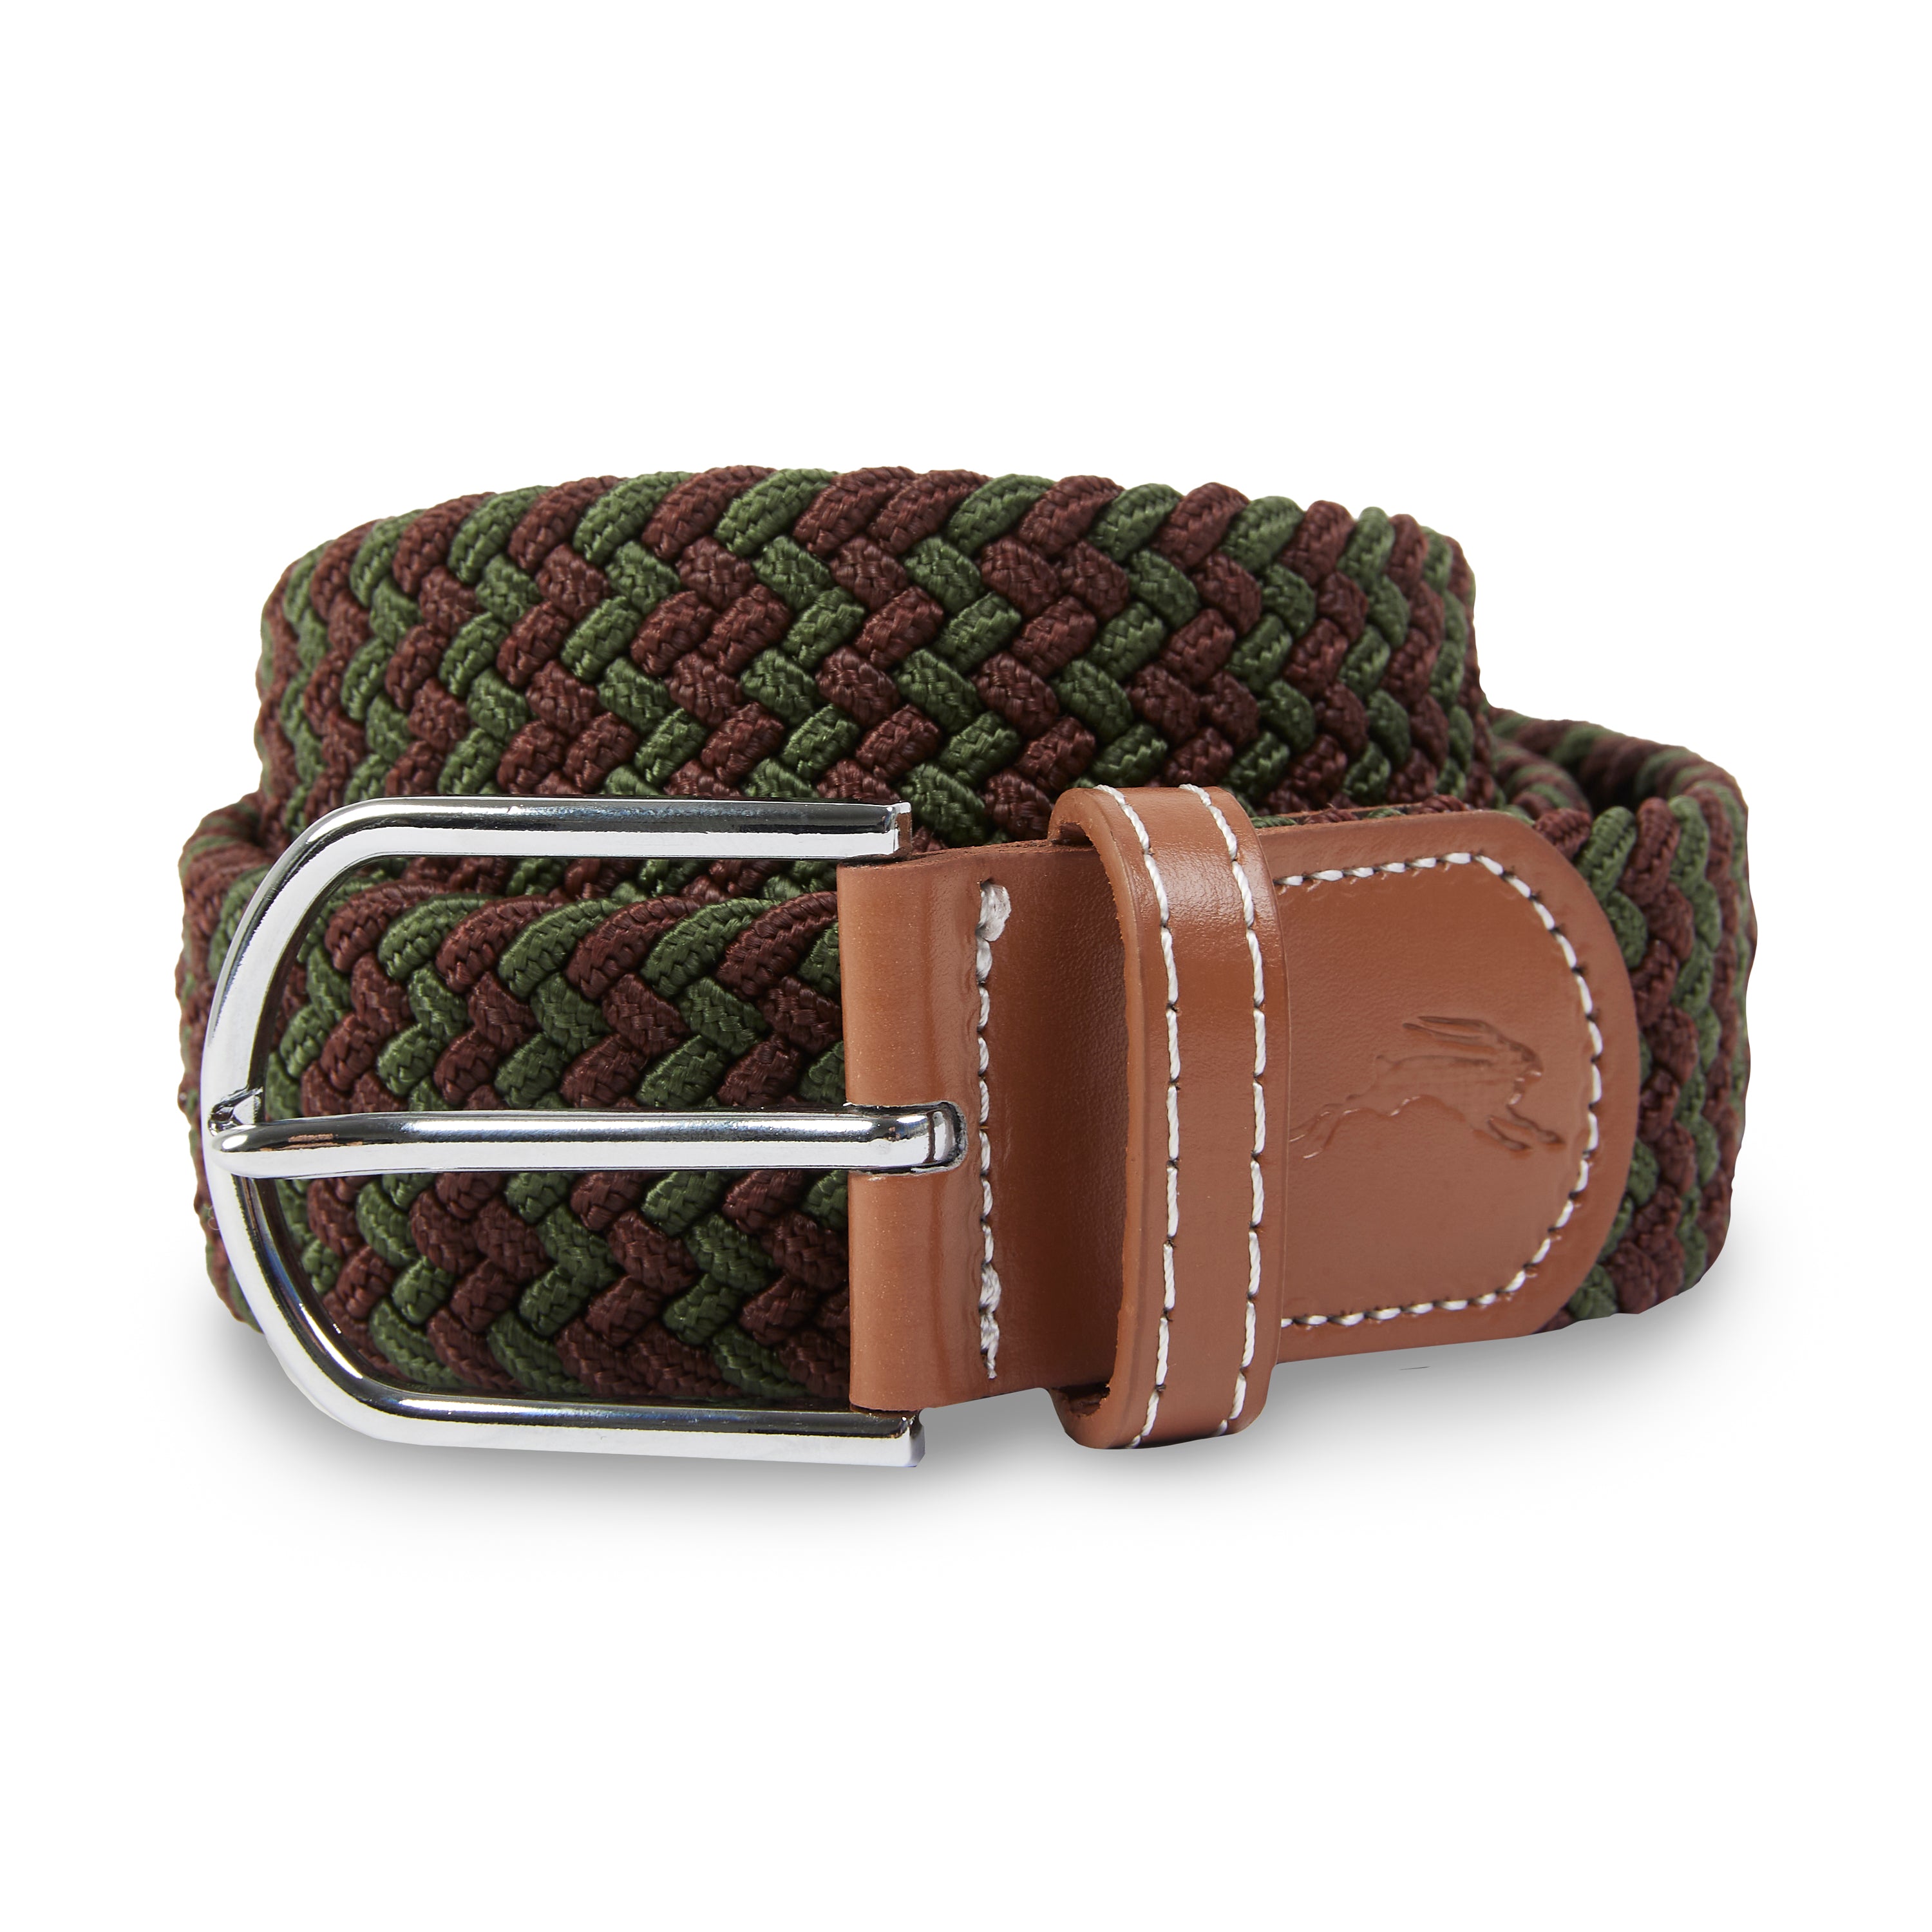 Burrows & Hare  One Size Woven Belt - Green & Brown